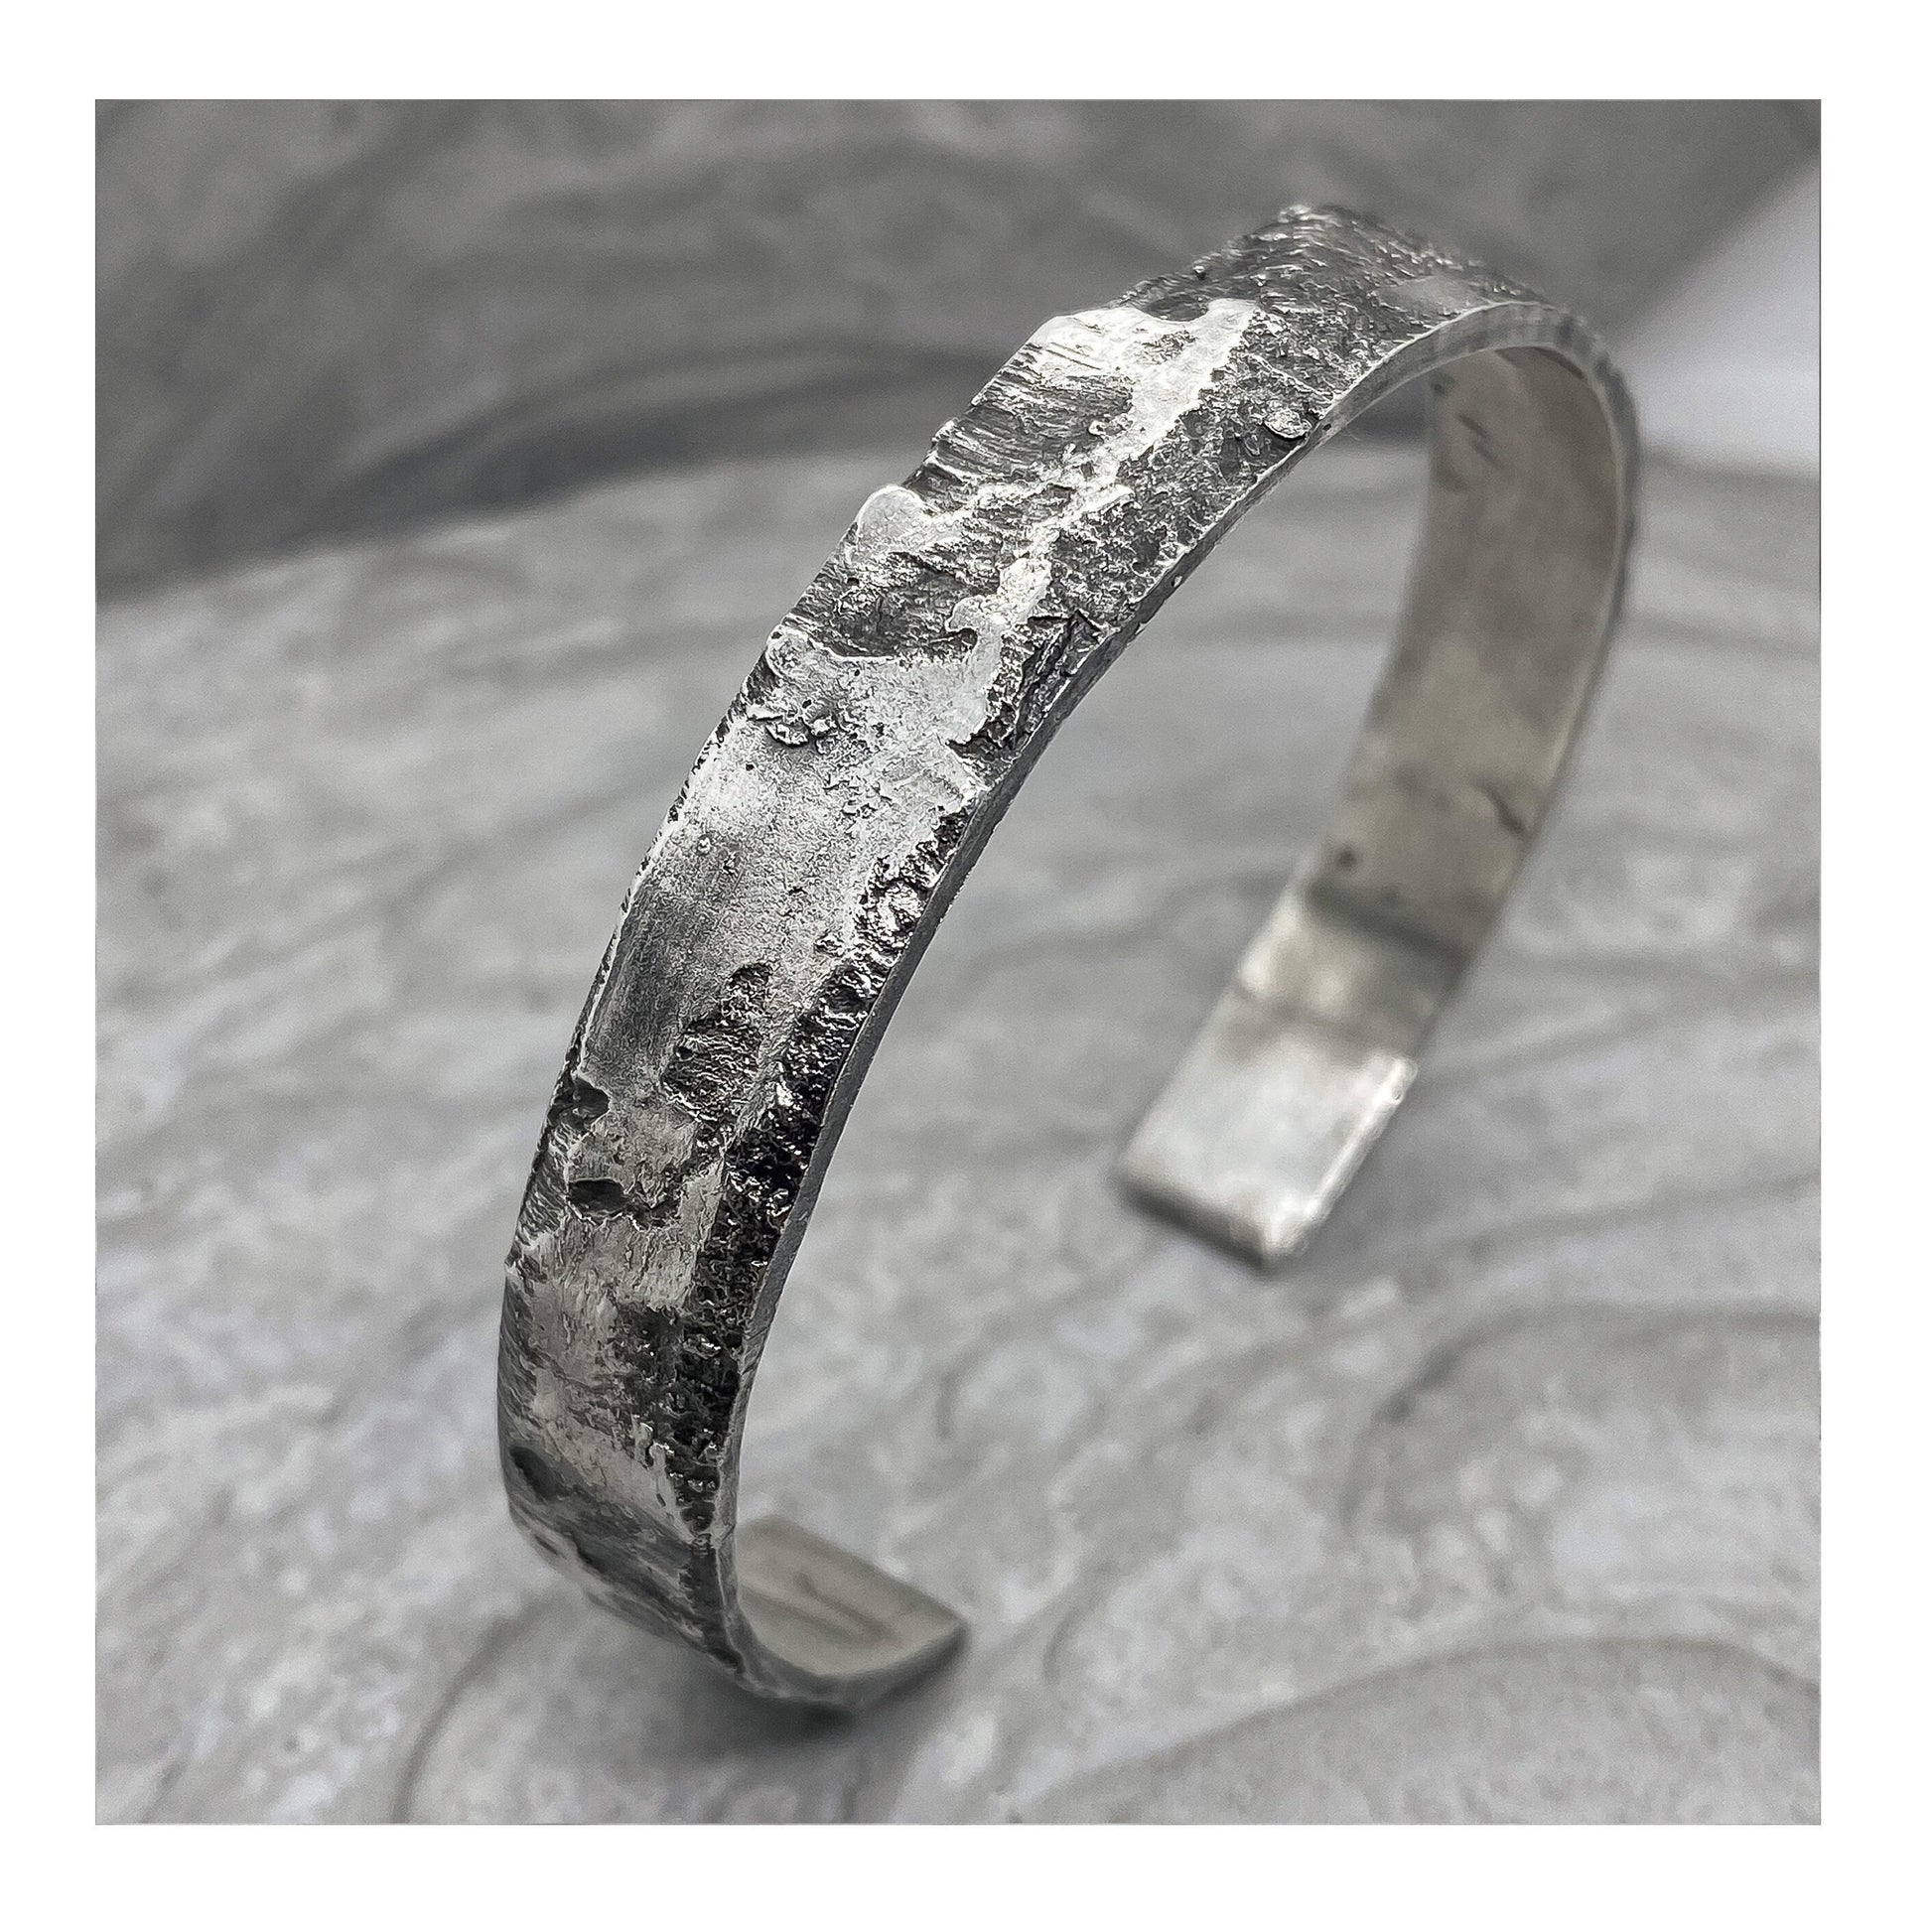 Milky way bangle- Сhunky silver cuff bracelet with unusual texture Bracelets Project50g 